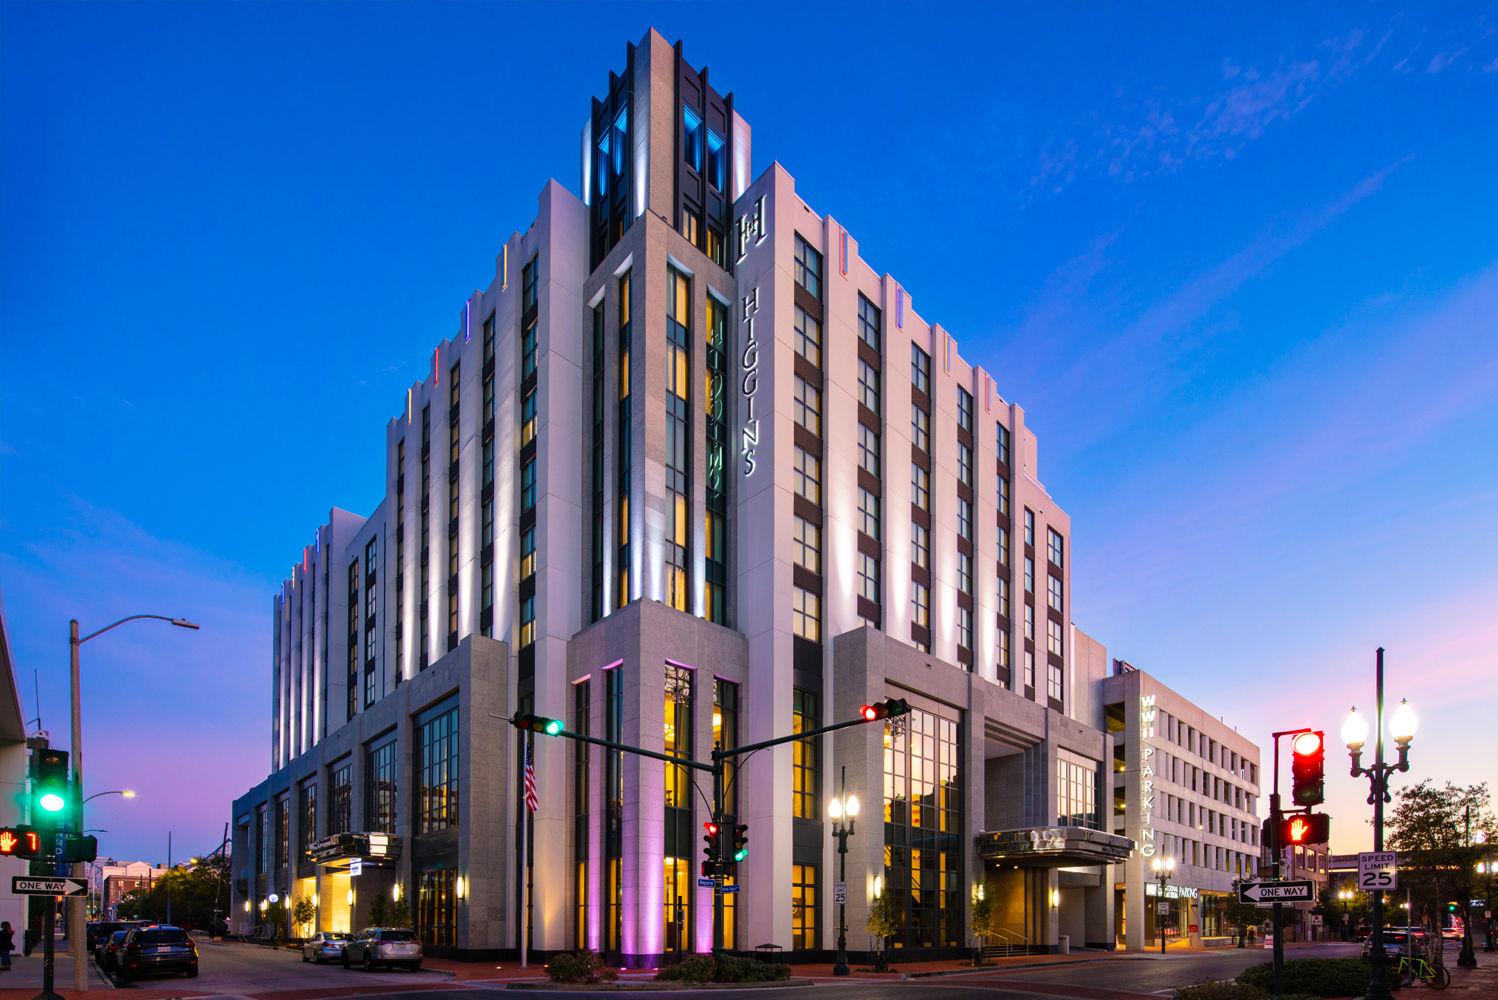 The National WWII Museum opened its landmark hotel property The Higgins Hotel New Orleans Curio Collection by Hilton Archi